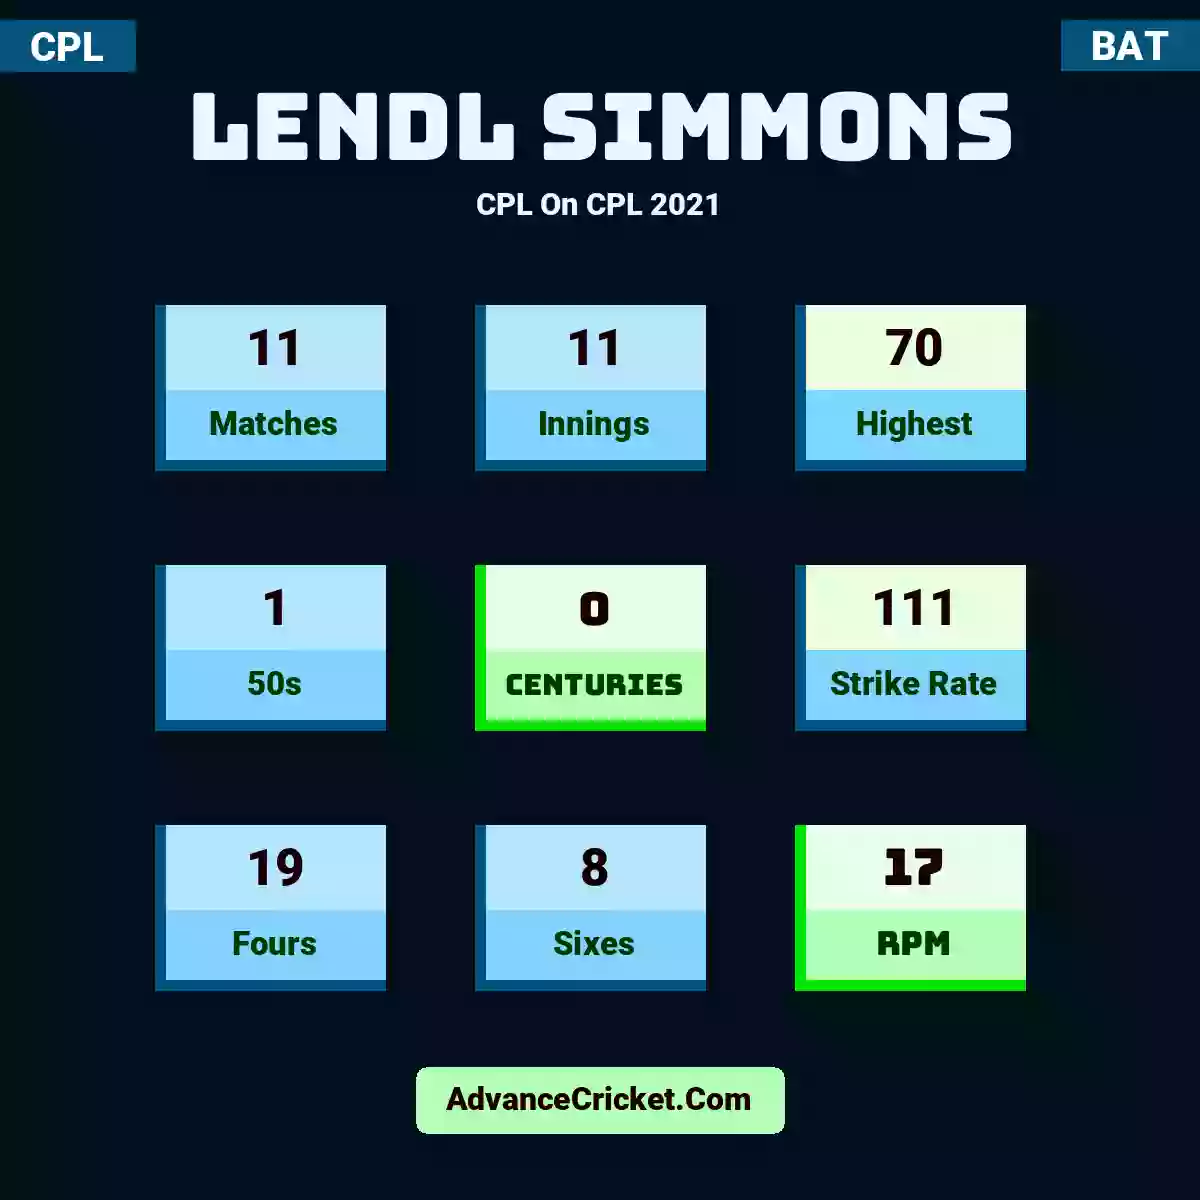 Lendl Simmons CPL  On CPL 2021, Lendl Simmons played 11 matches, scored 70 runs as highest, 1 half-centuries, and 0 centuries, with a strike rate of 111. L.Simmons hit 19 fours and 8 sixes, with an RPM of 17.